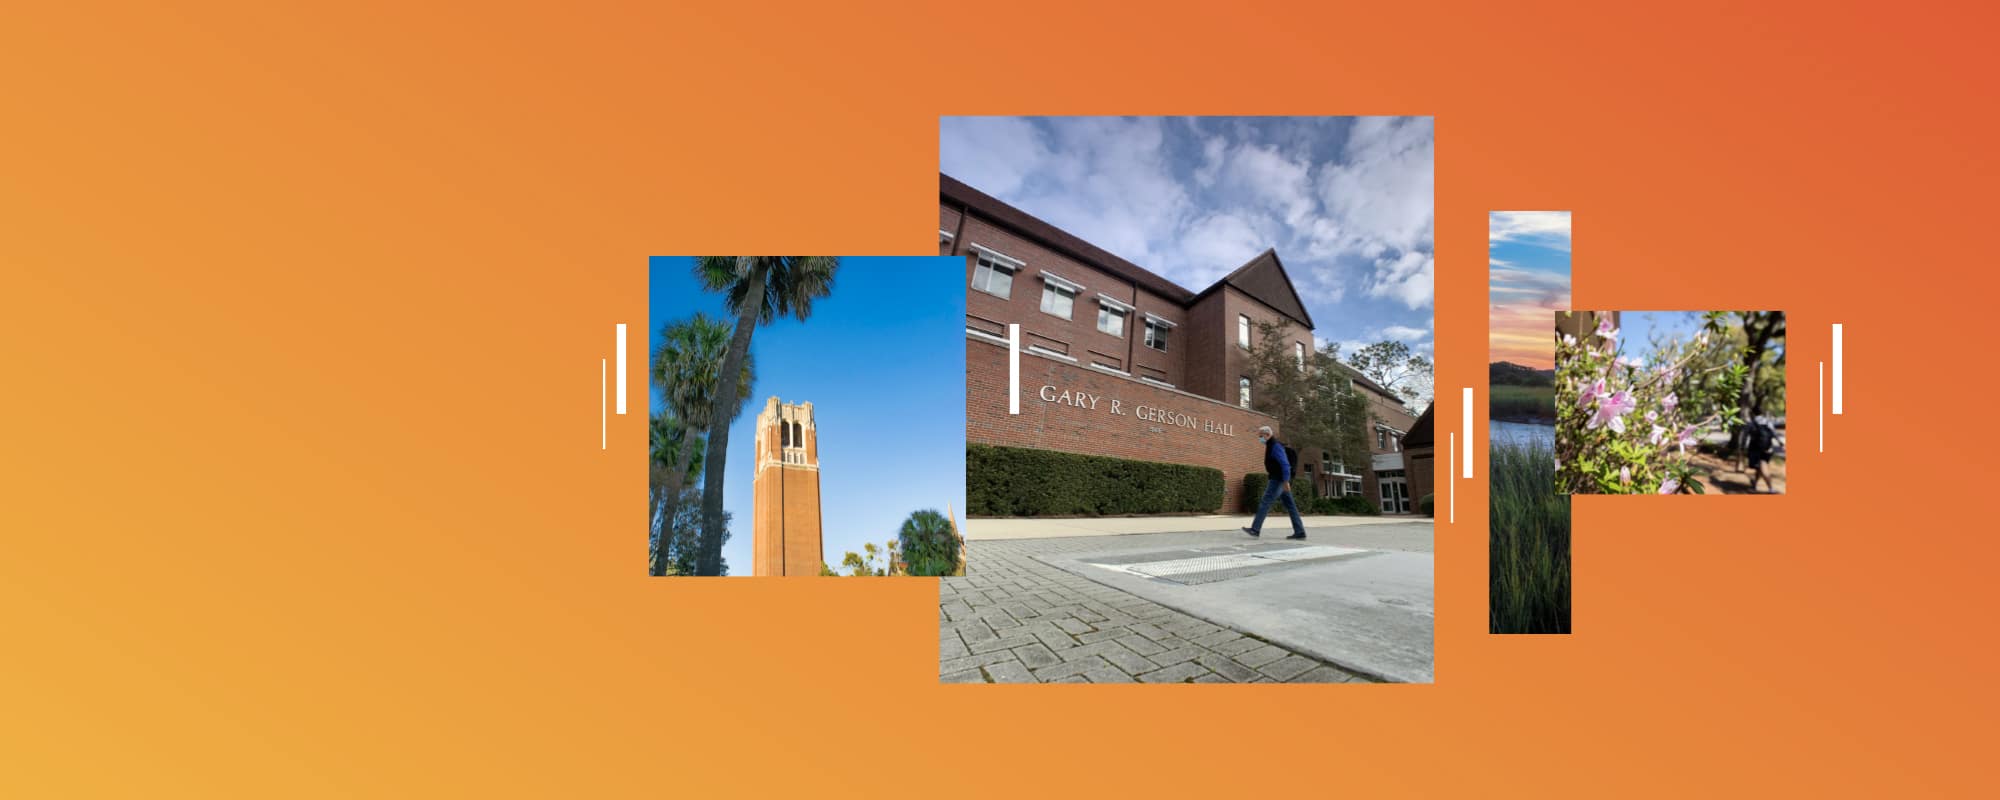 Orange background with images of campus including large tower, Gerson Hall.